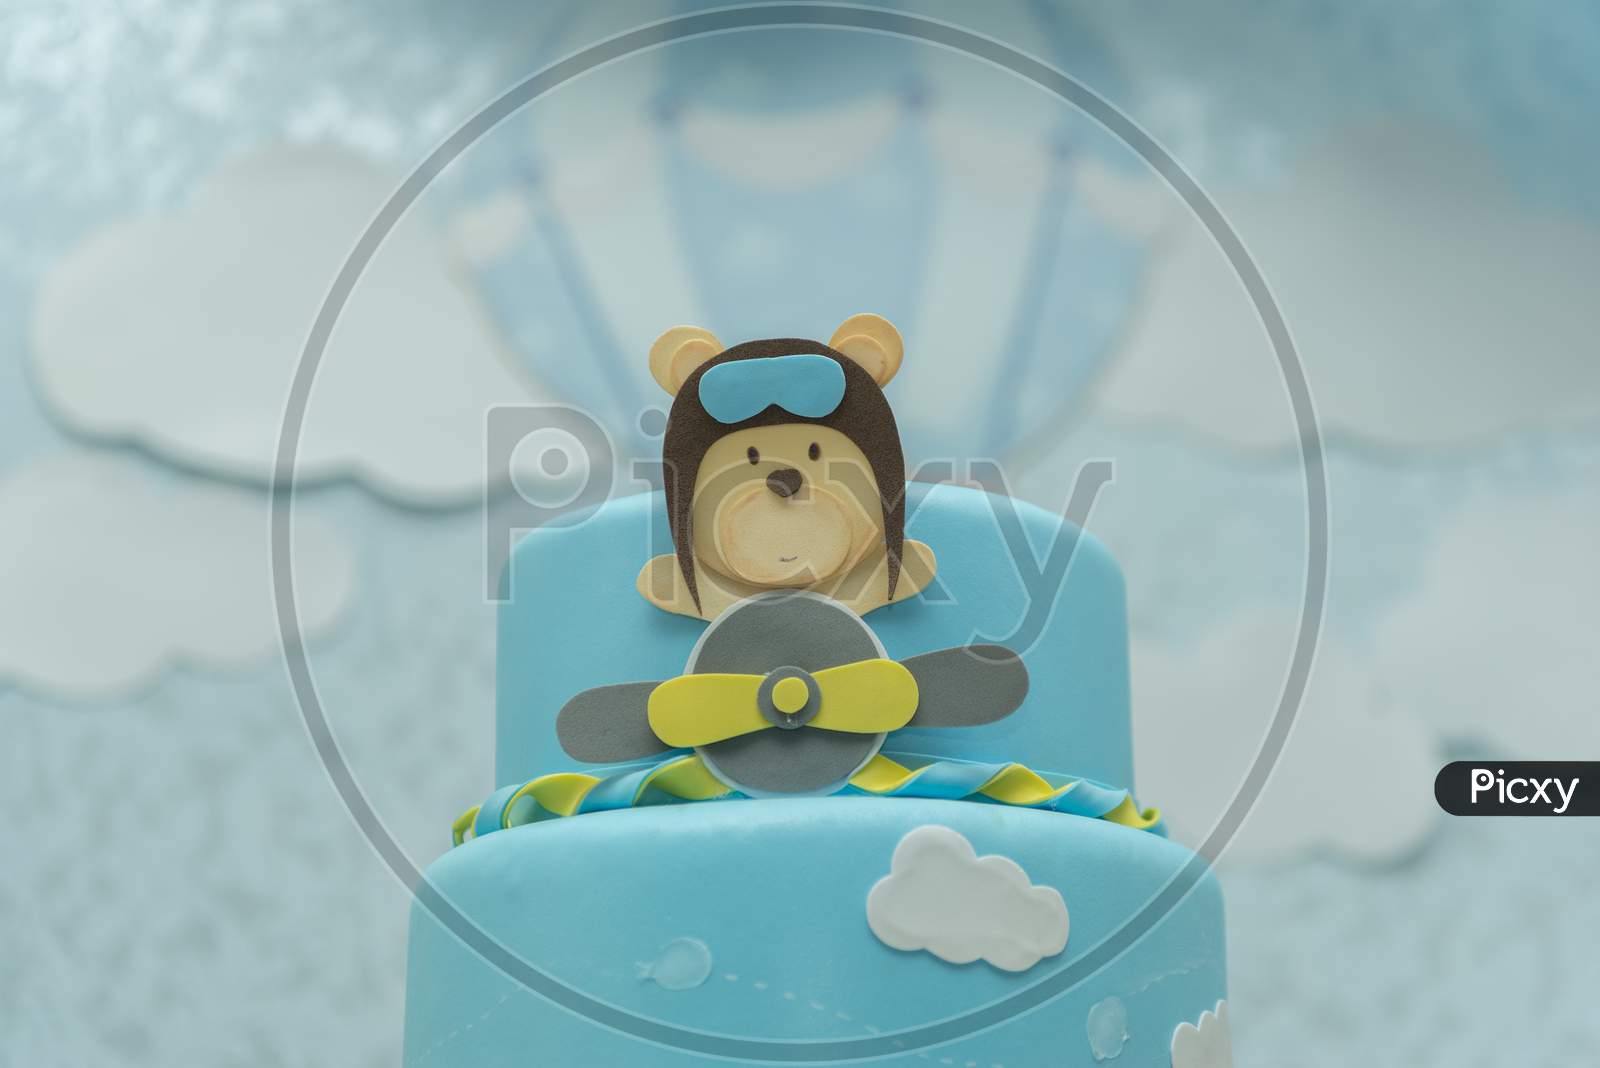 Close Up Of Blue Cake Decorated With Cute Aviator Bear, Plane And Clouds.